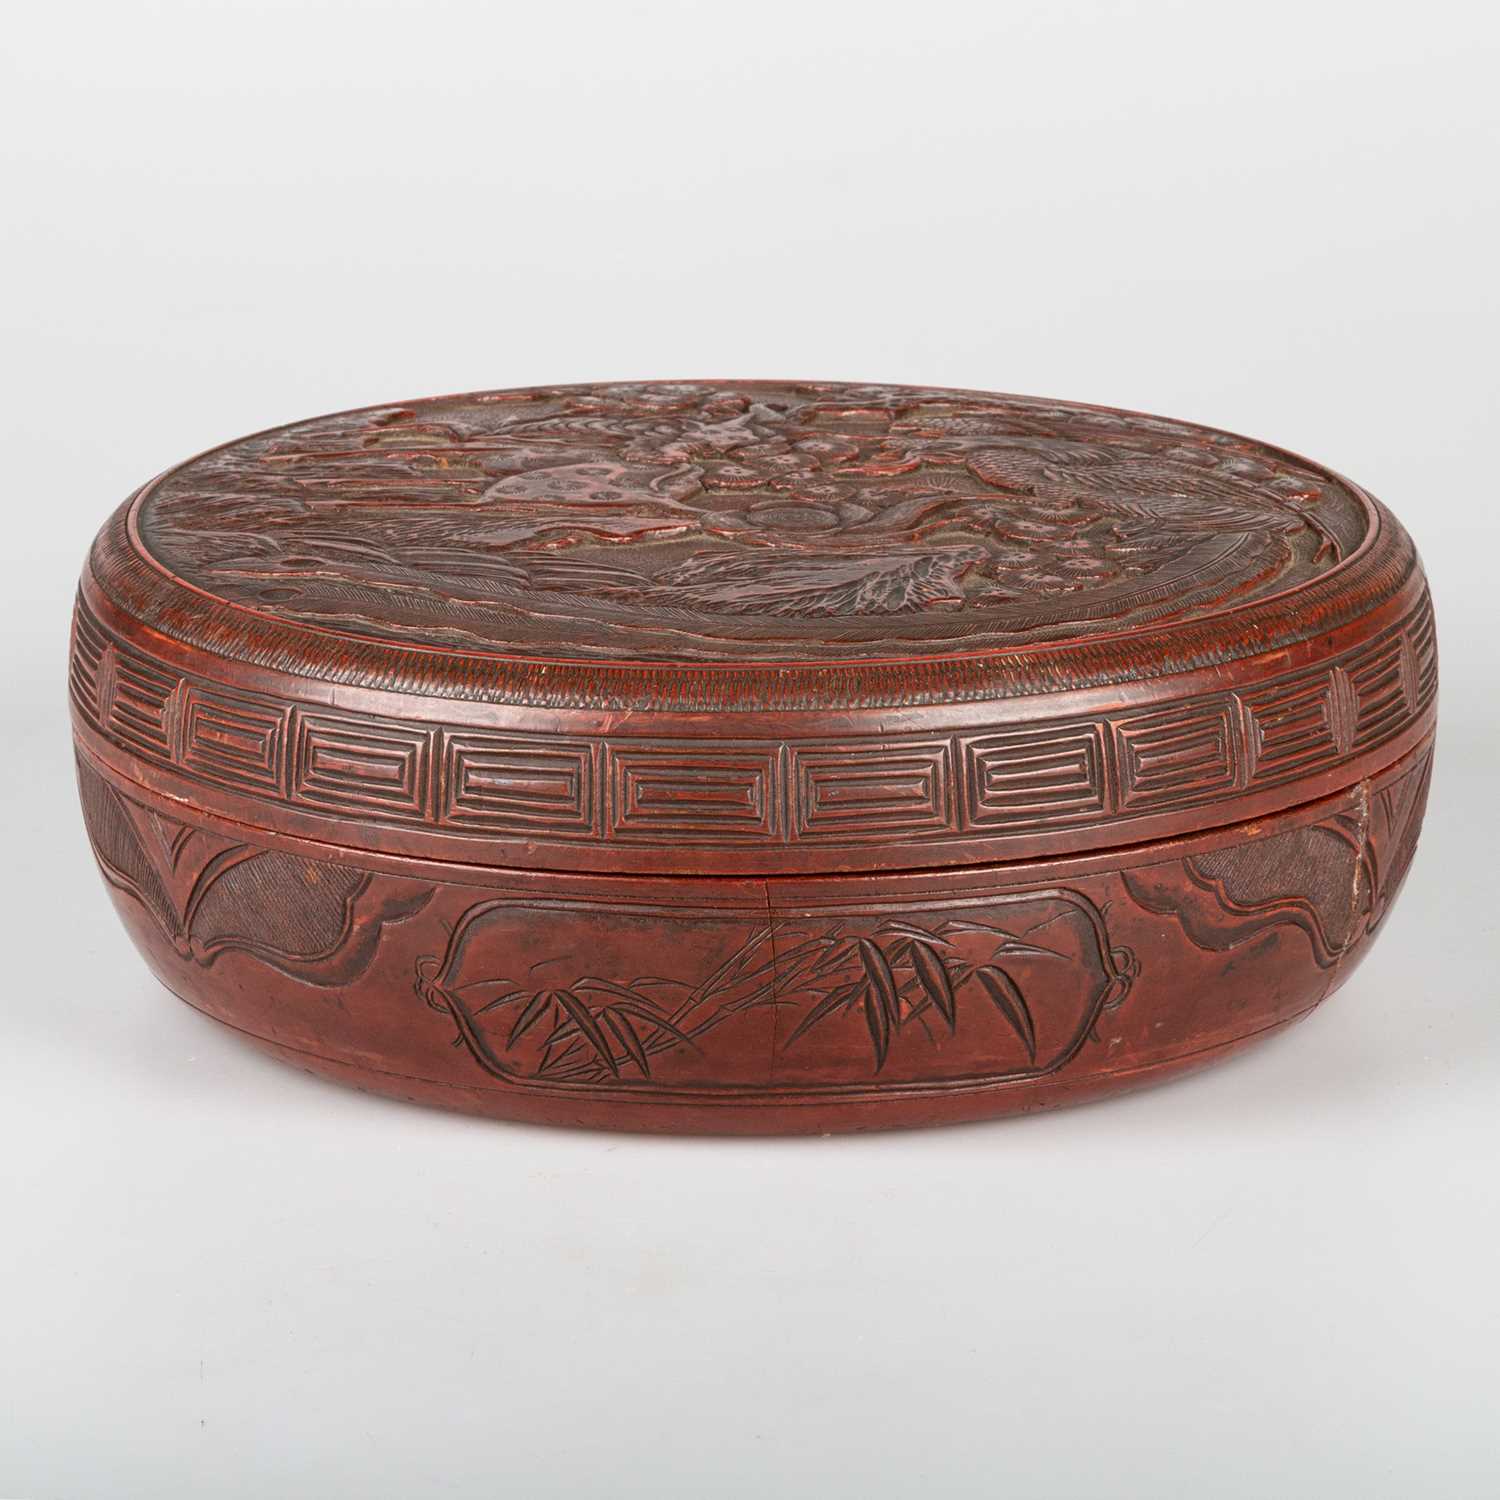 A CHINESE RED CINNABAR LACQUER BOX AND COVER, QING DYNASTY